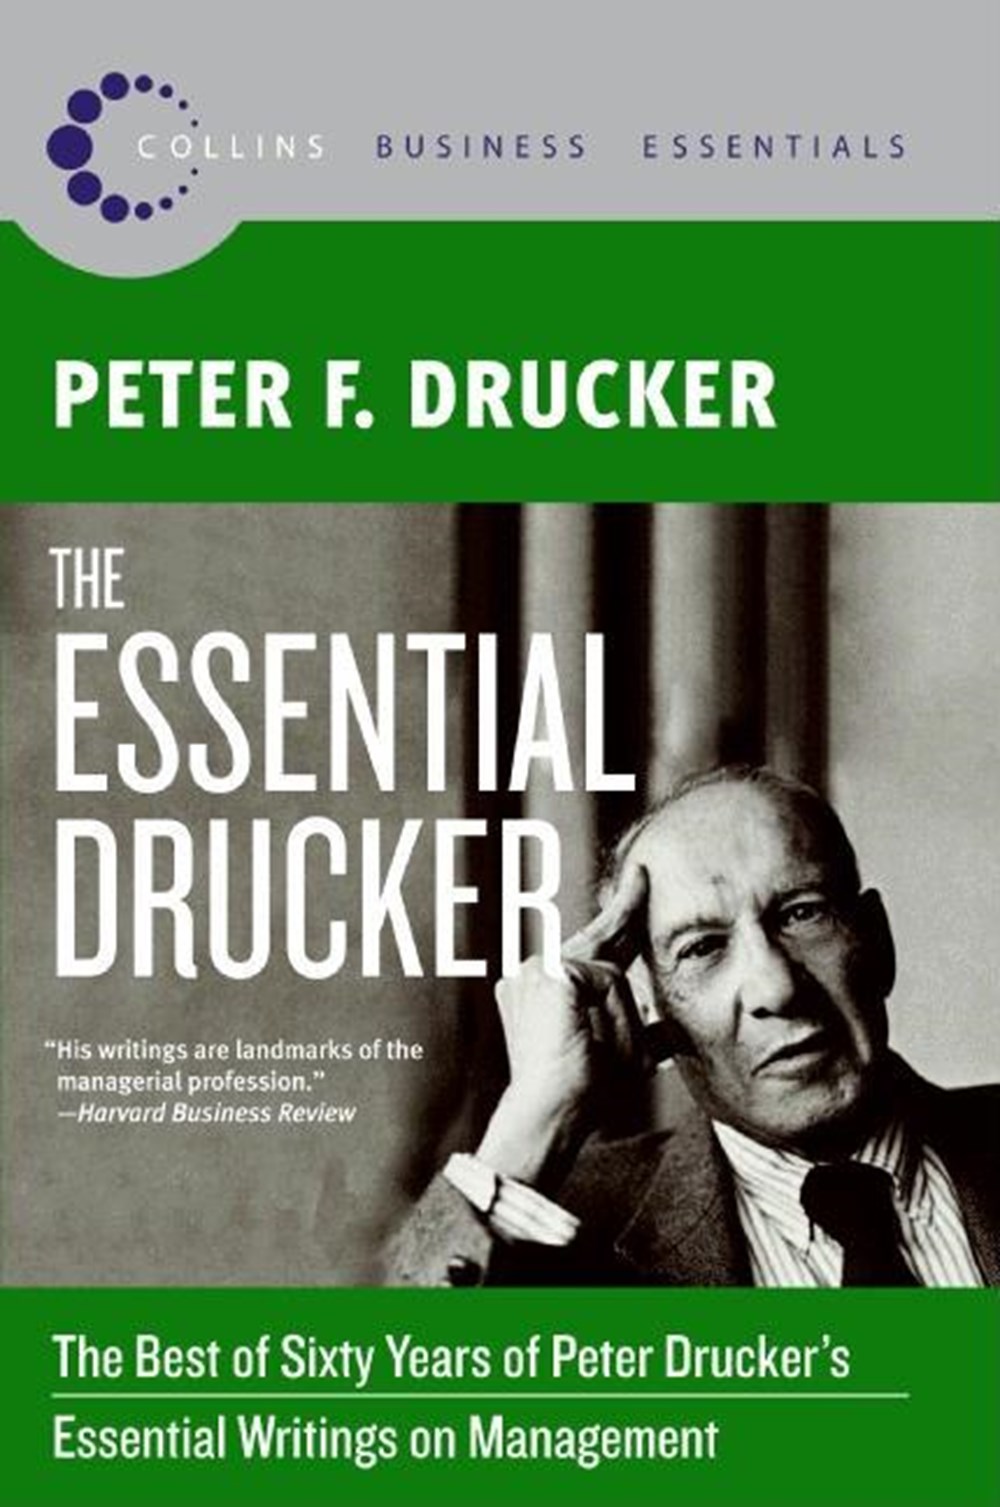 Essential Drucker The Best of Sixty Years of Peter Drucker's Essential Writings on Management